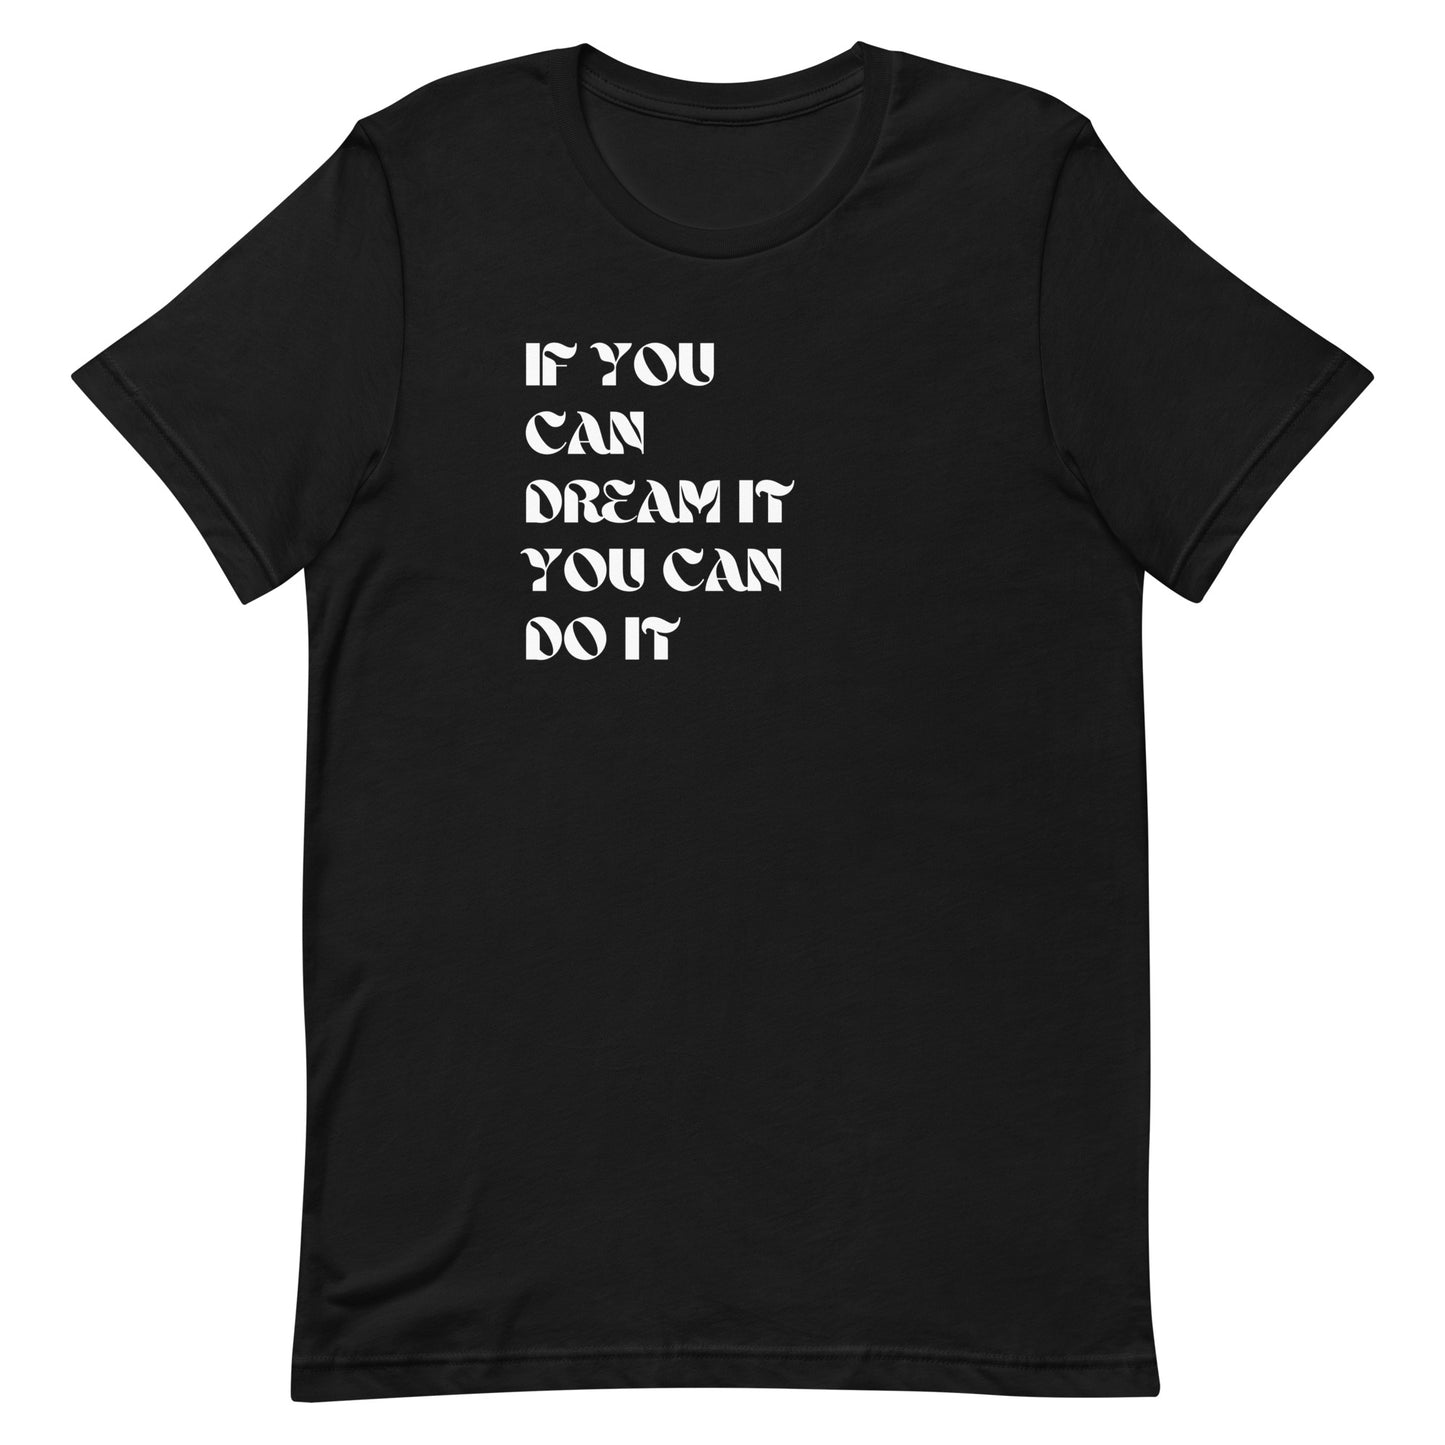 "Dream It, Do It" - Inspiring T-shirt for Dreamers and Achievers.